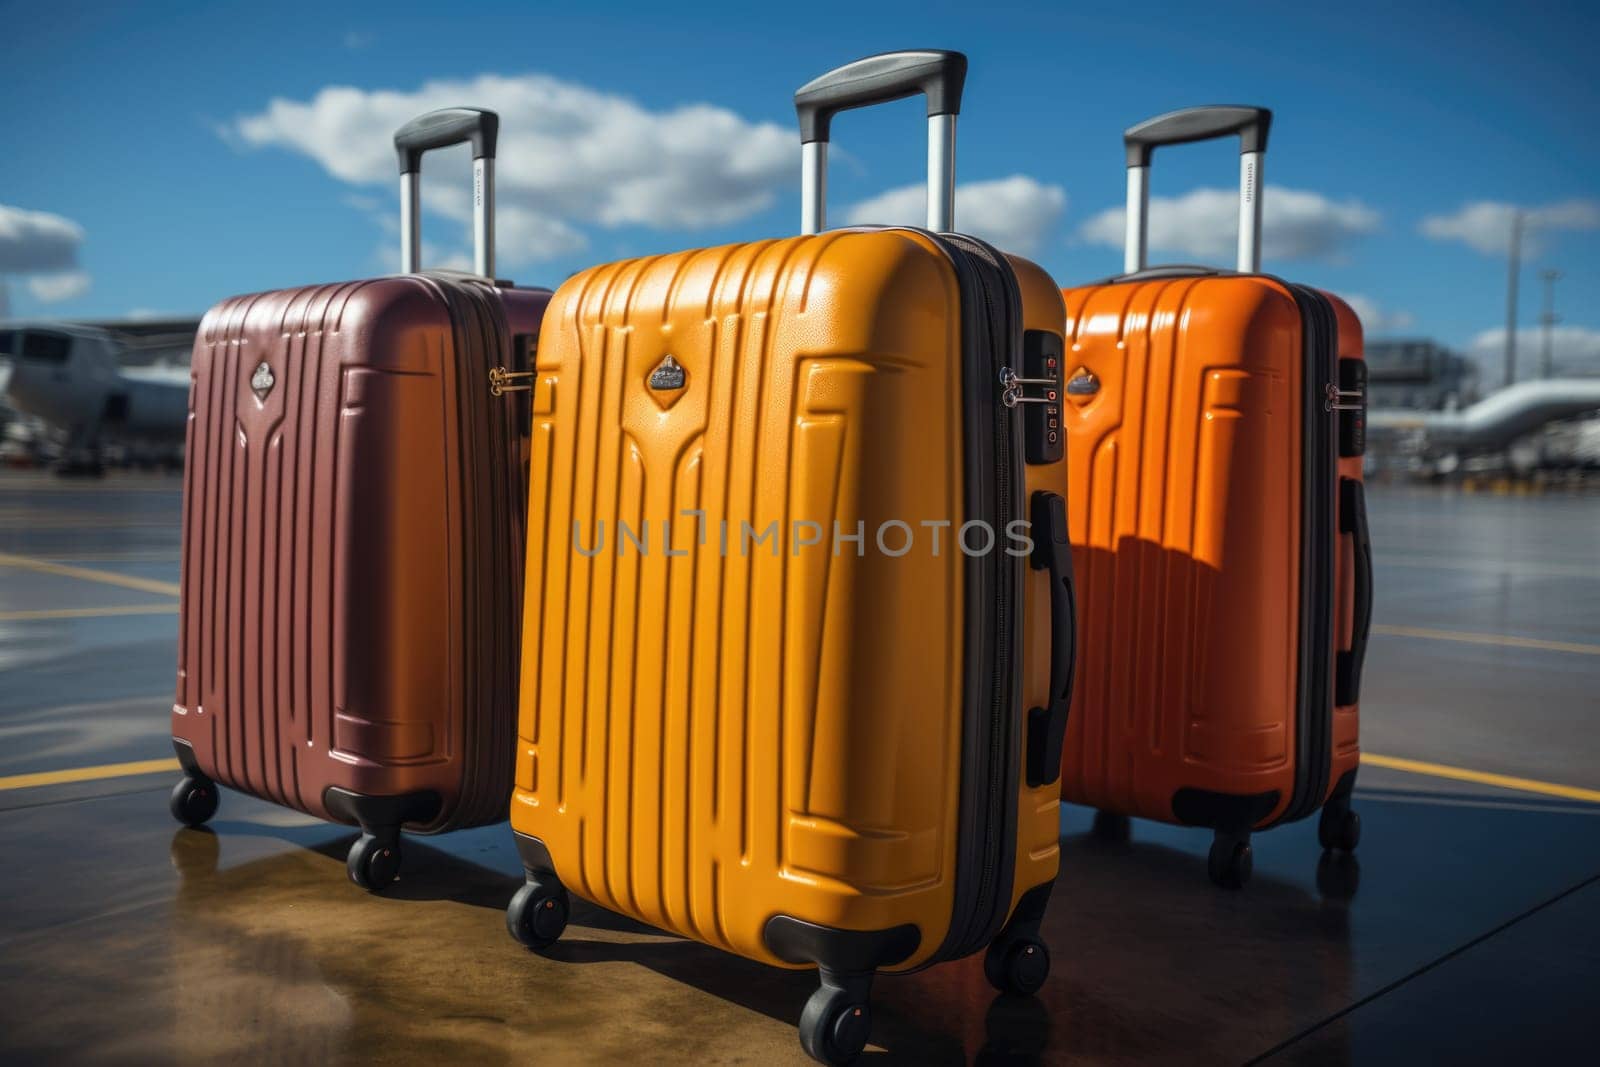 Three stylish colored suitcases standing in an empty airport.